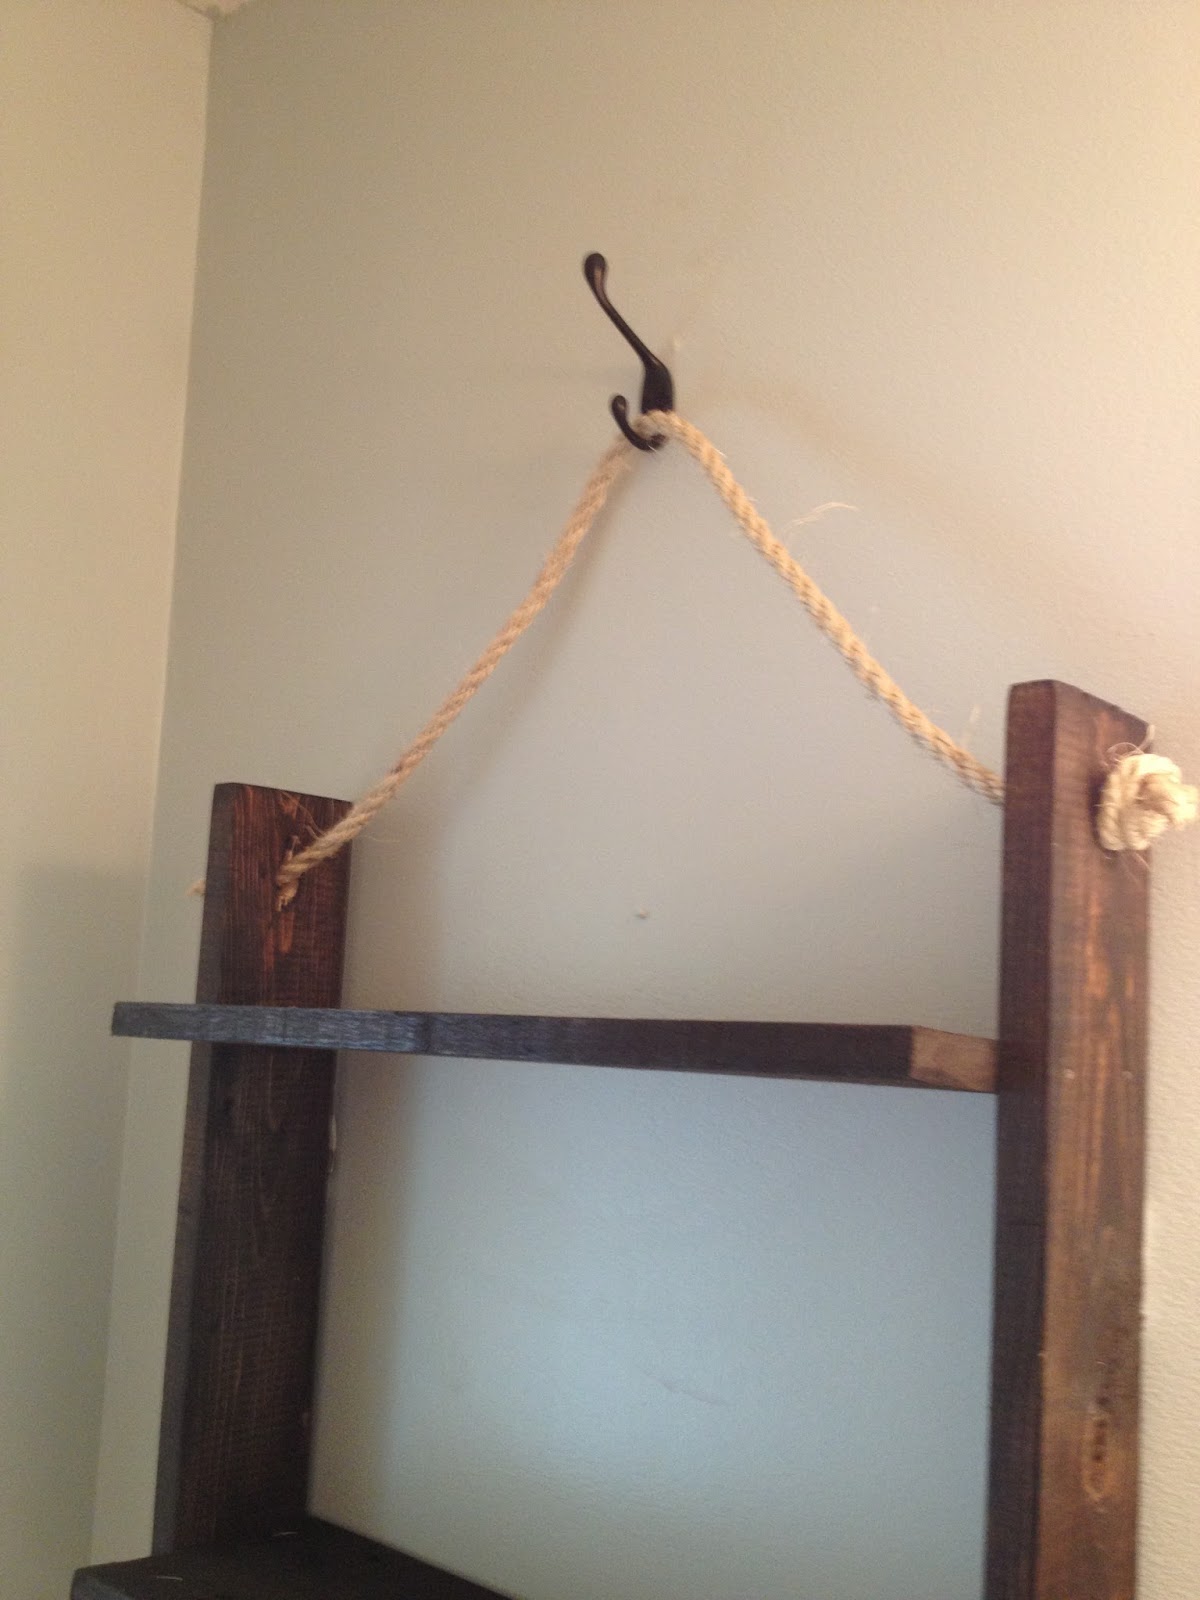 How to make a Hanging Bathroom Shelf for only $10! - Shanty 2 Chic